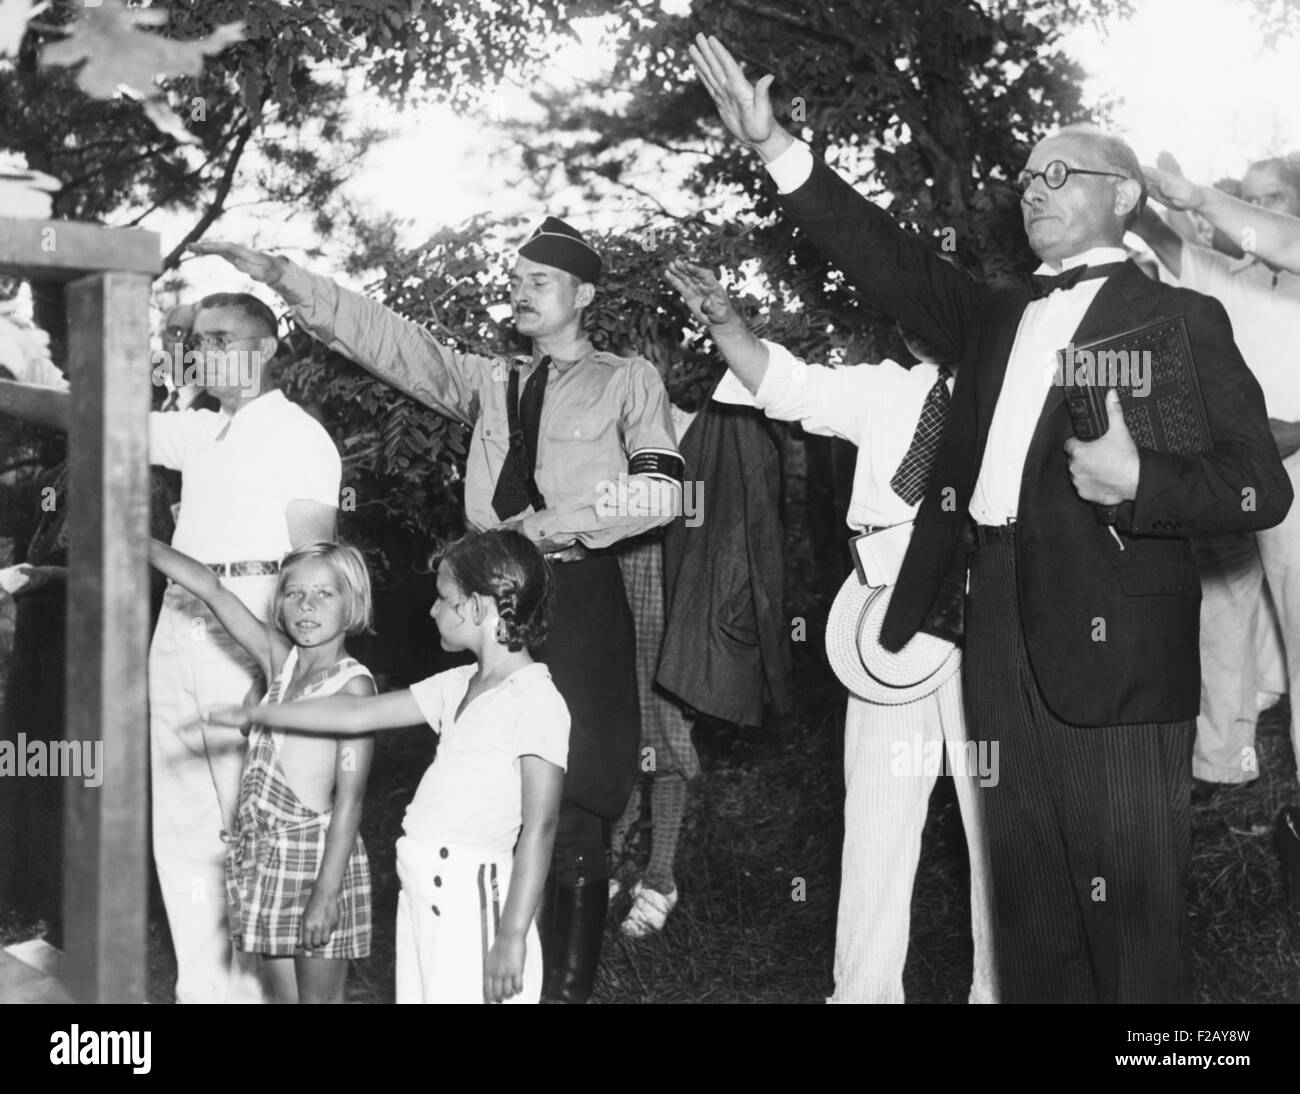 Germans in America give the Nazi salute commemorating Paul von Hindenburg. August 1, 1937, at Camp Siegfried, near Yaphank, New Stock Photo